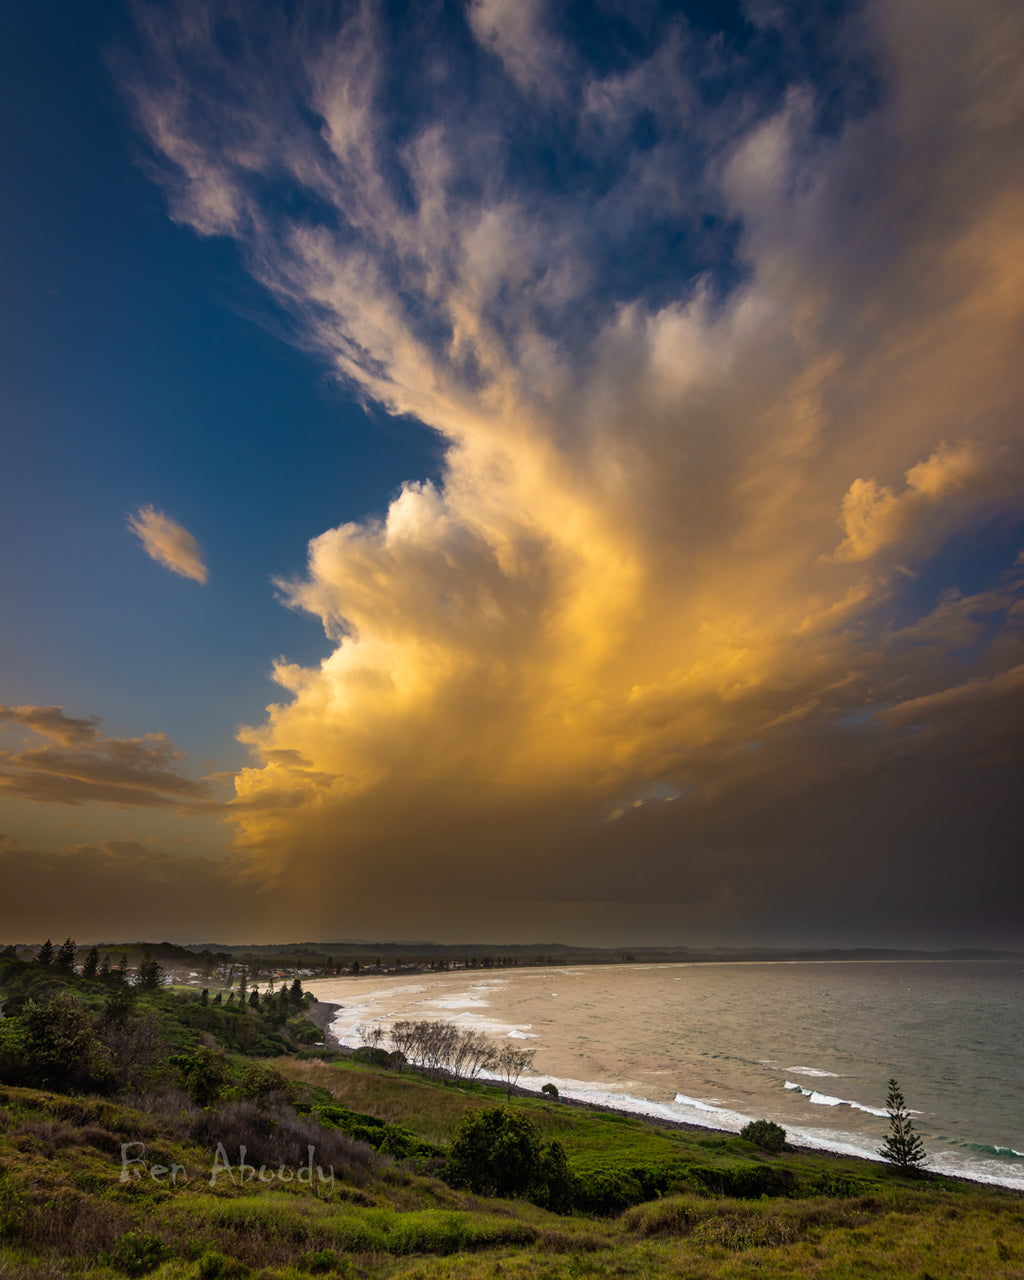 Cloud Formations - Ben Aboody Photography